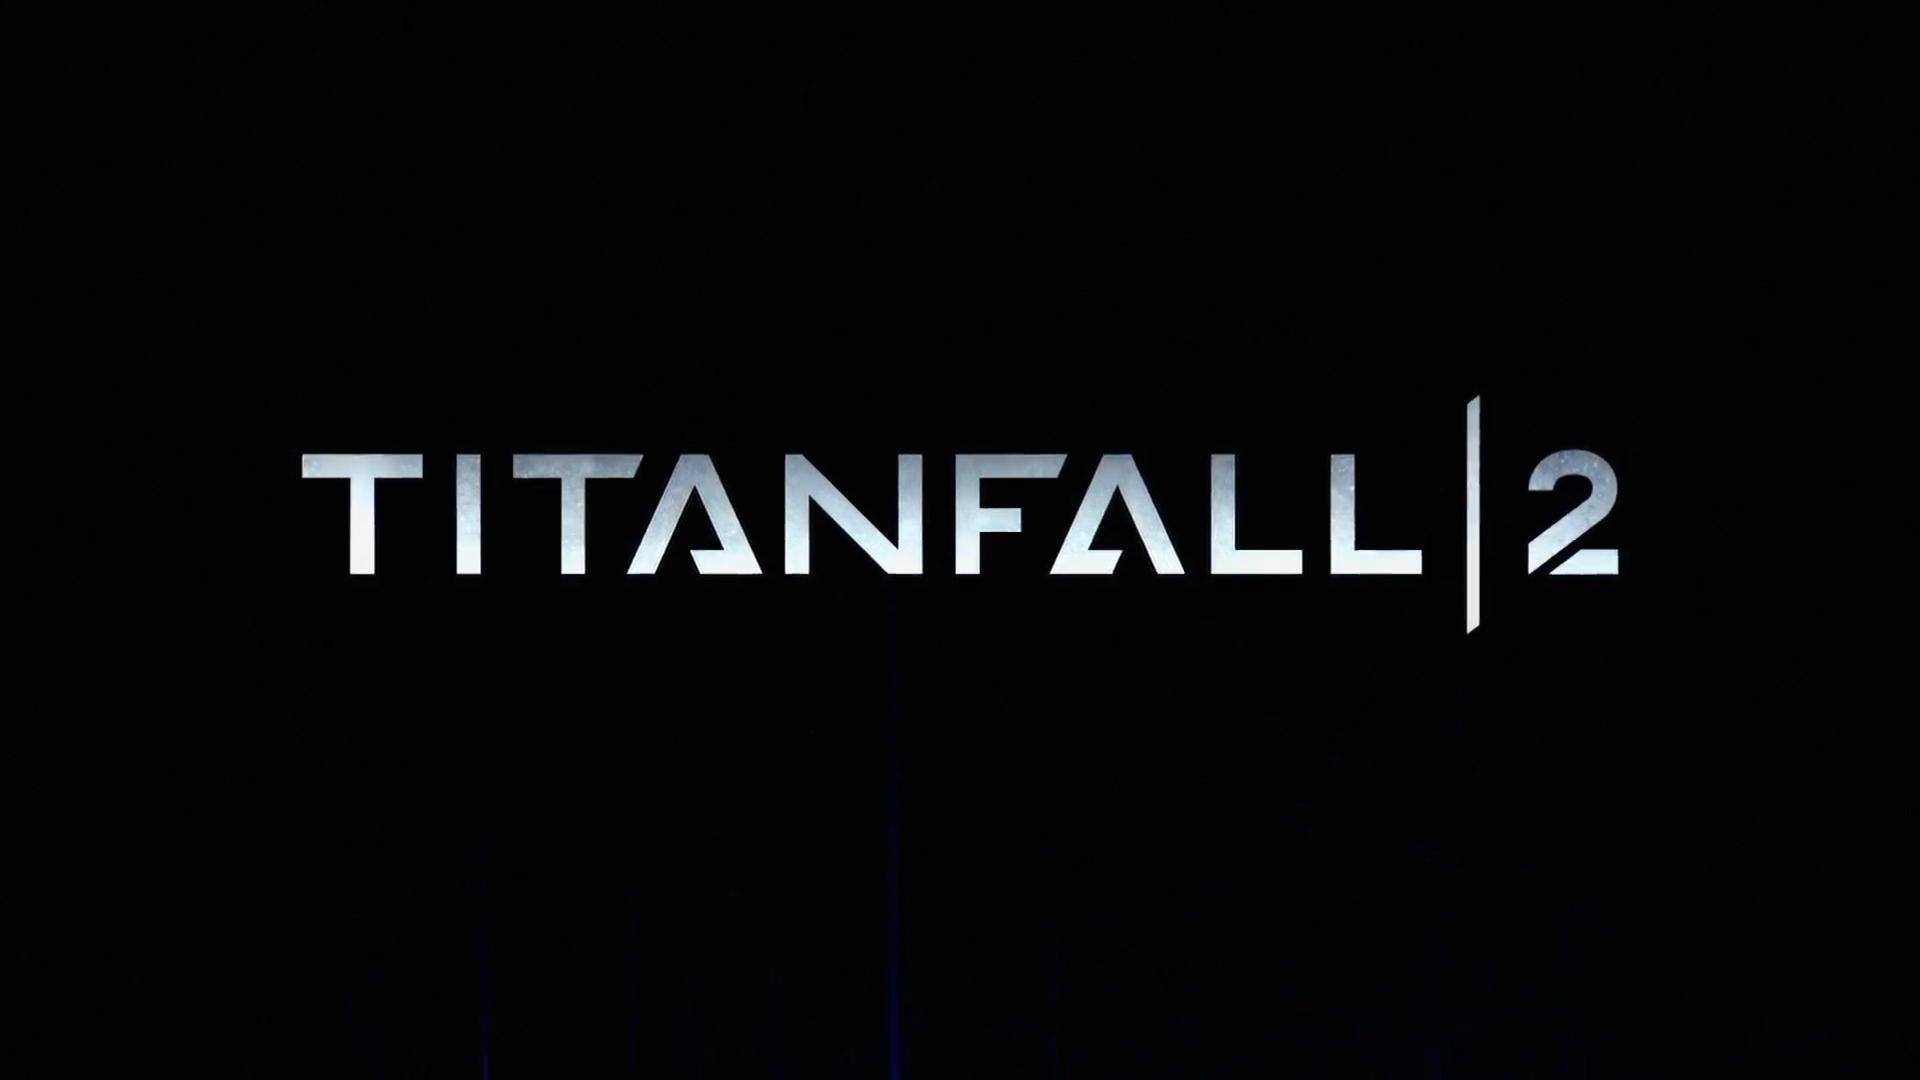 Titanfall 2 goes GOLD